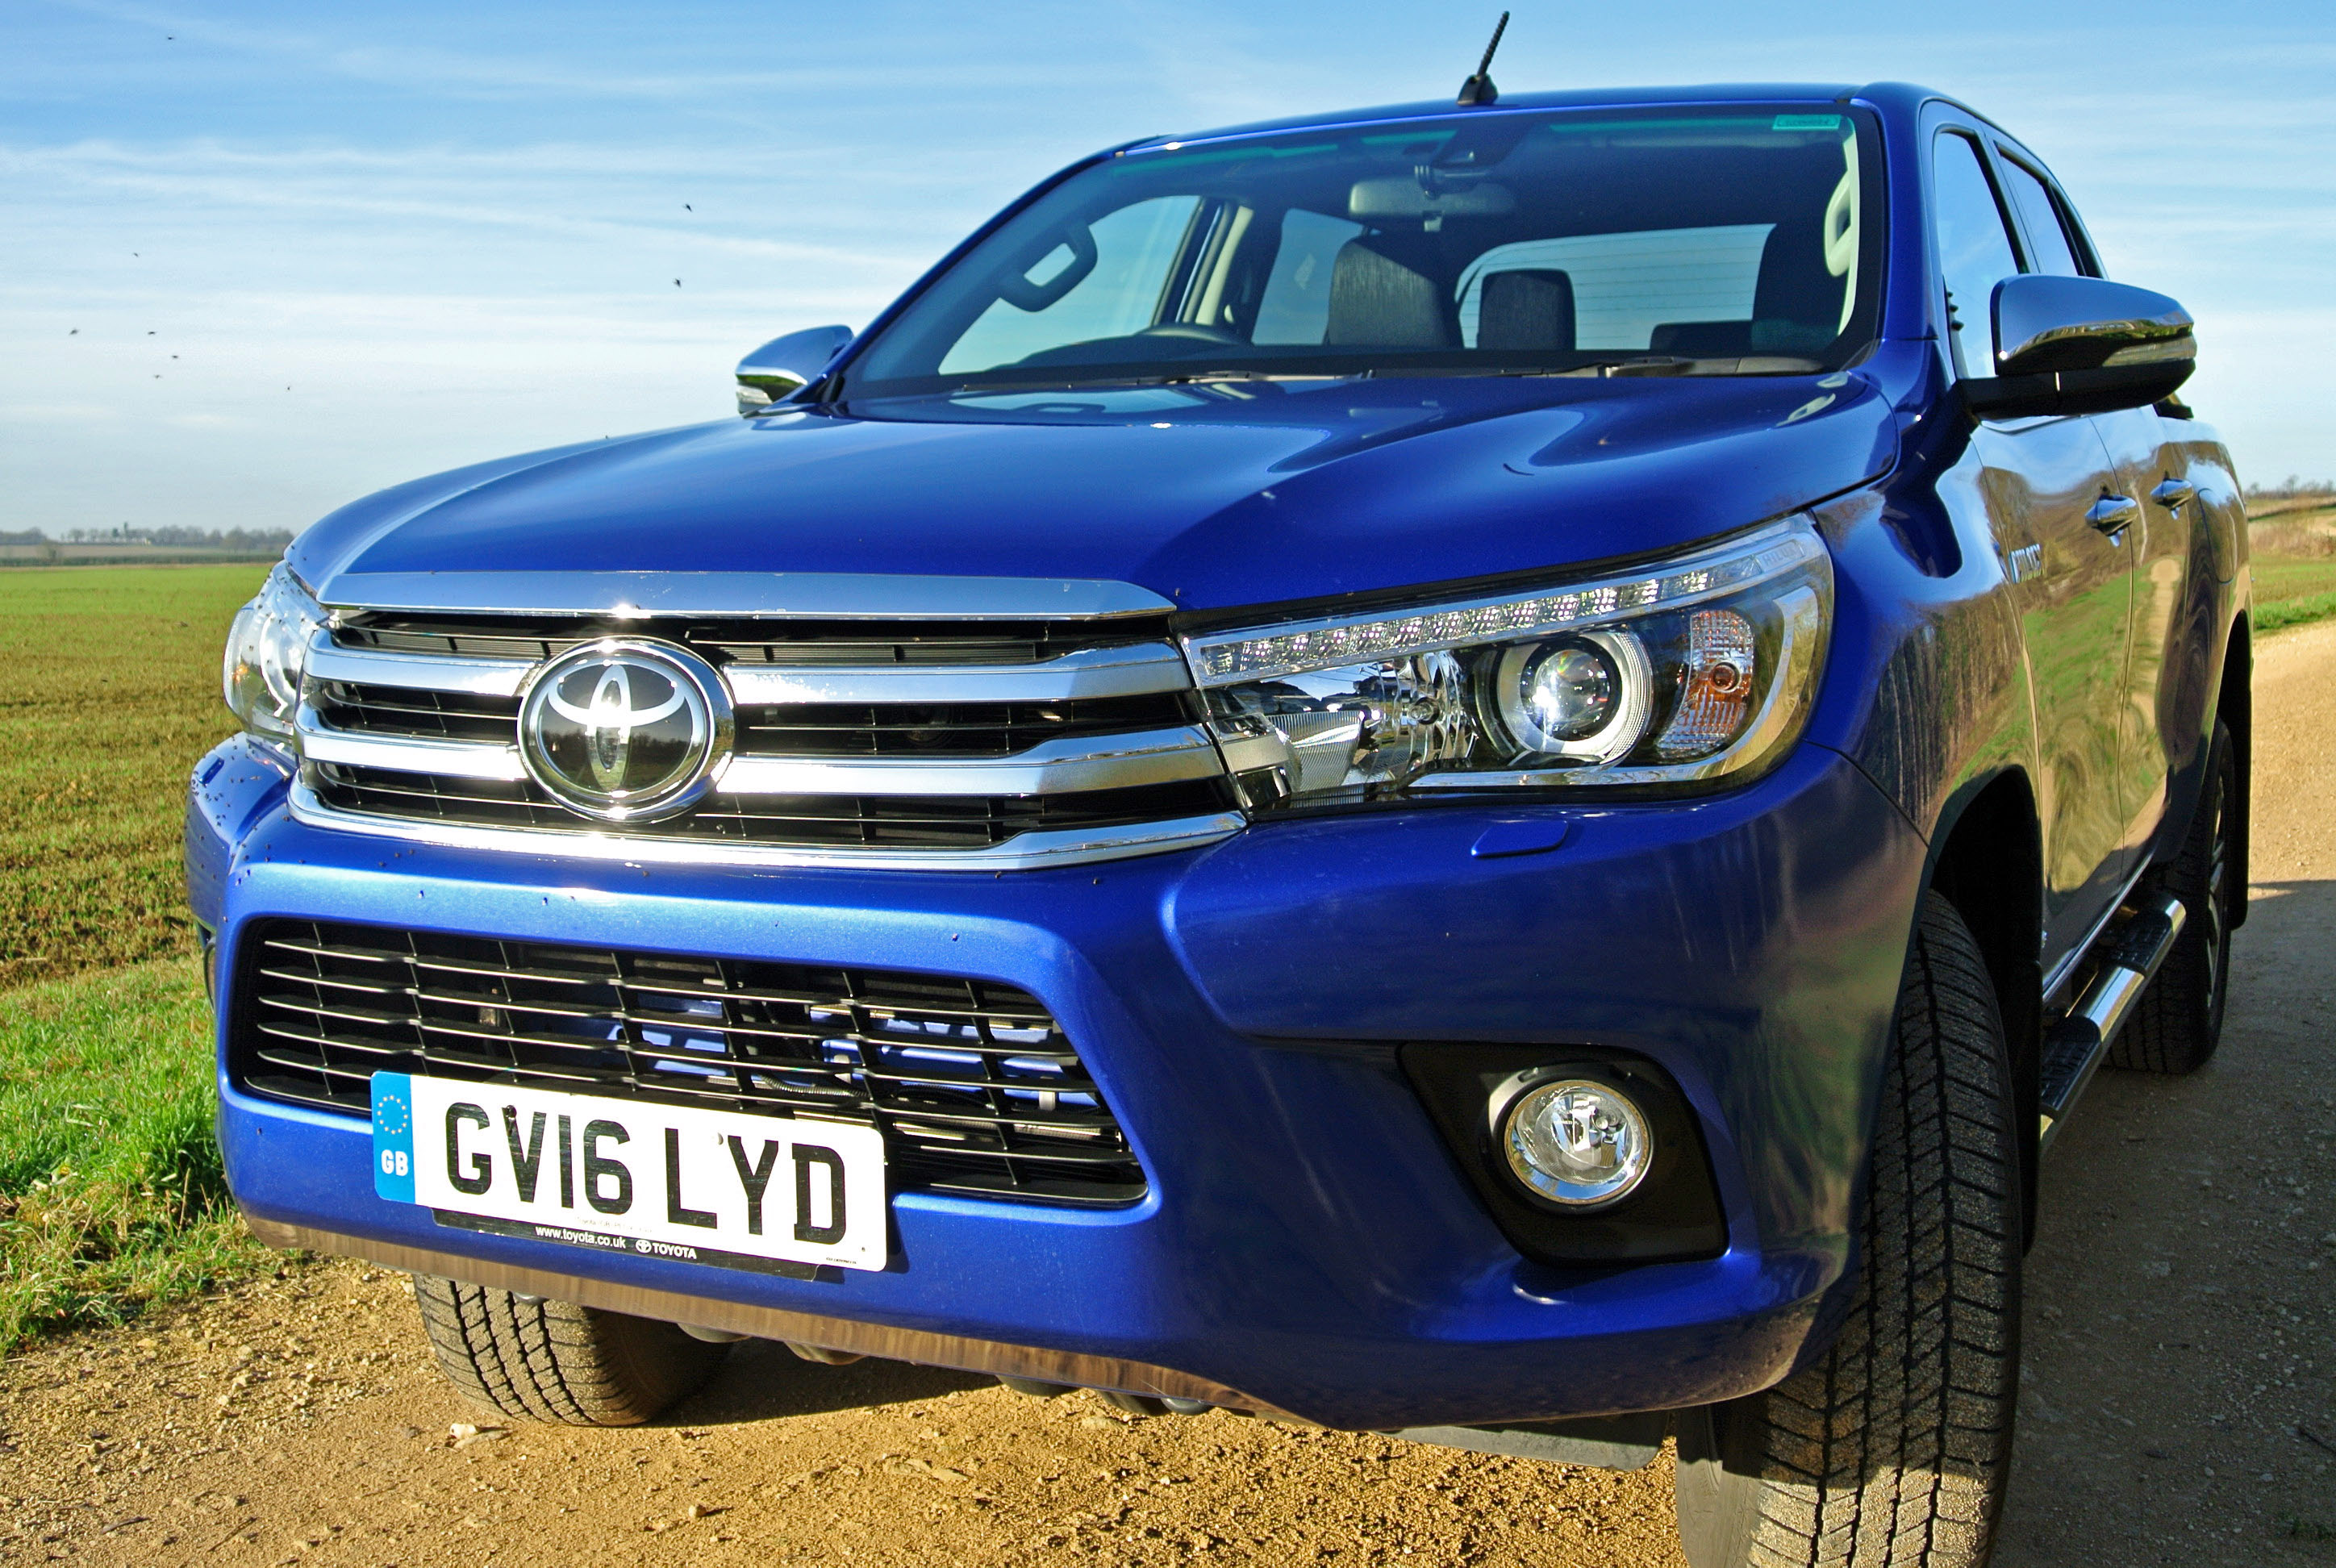 If you fancy a Toyota Hilux, think about your corporate needs first